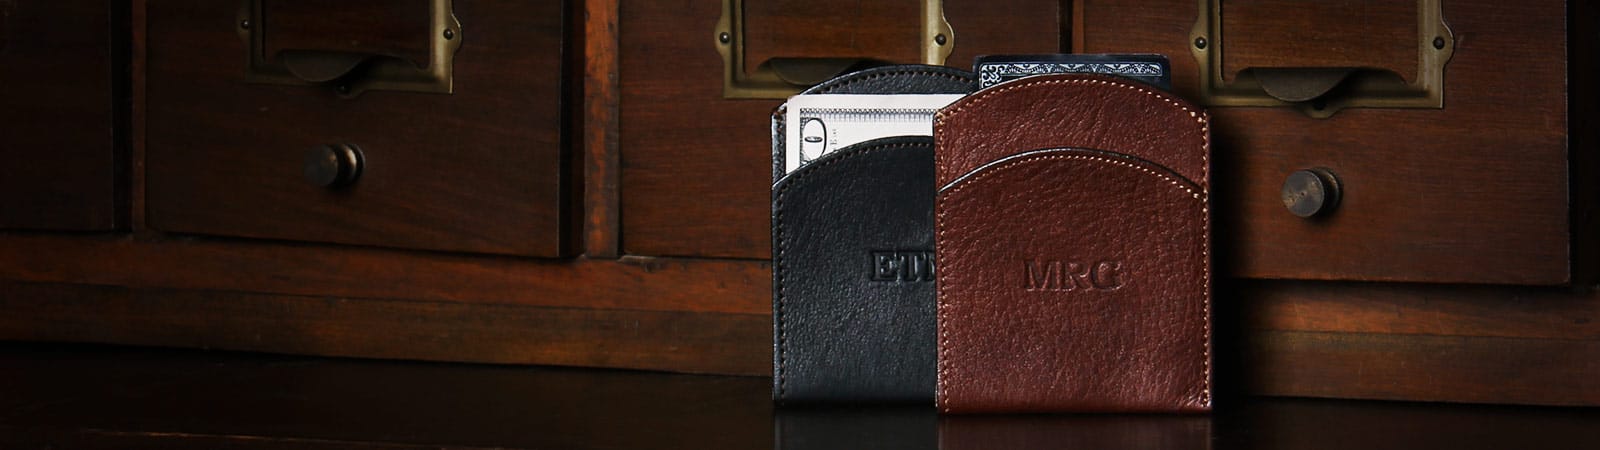 Wallets and Key Rings Category Header - Two leather Front Pocket Wallets in a wooden shelf, vintage brown in the front and black in the back